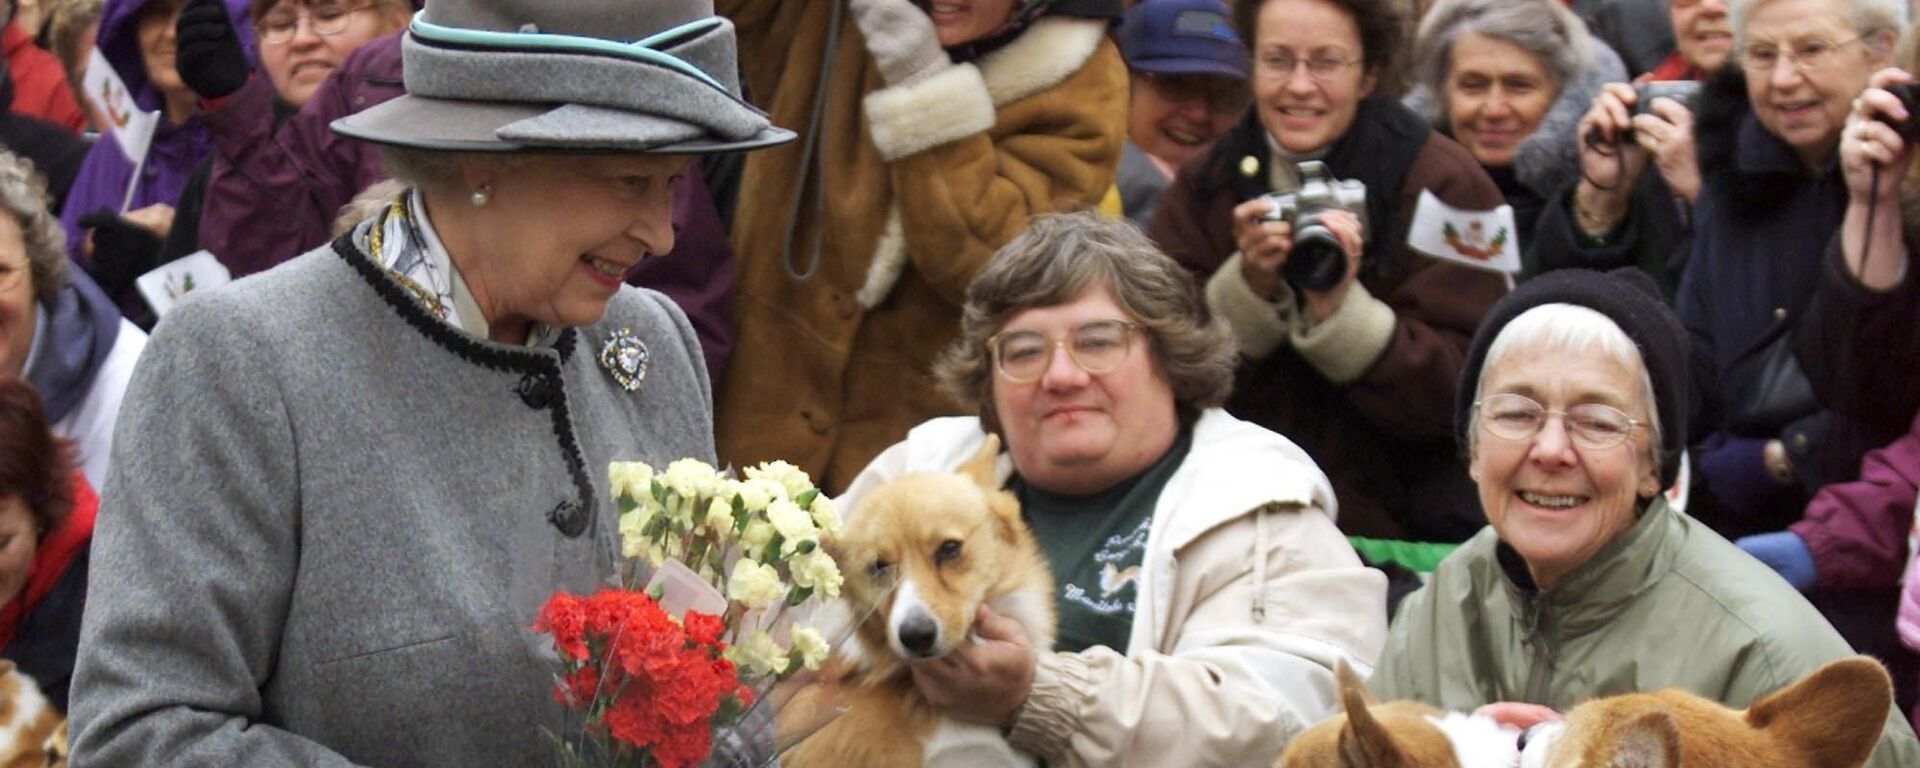 Queen Elizabeth II talks with members of the Manitoba Corgi Association during a visit to Winnipeg 08 October 2002. The queen, making her 20th trip to Canada, is the last stop on the year-long jubilee tour celebrating her 50-year reign.  - Sputnik International, 1920, 05.03.2021